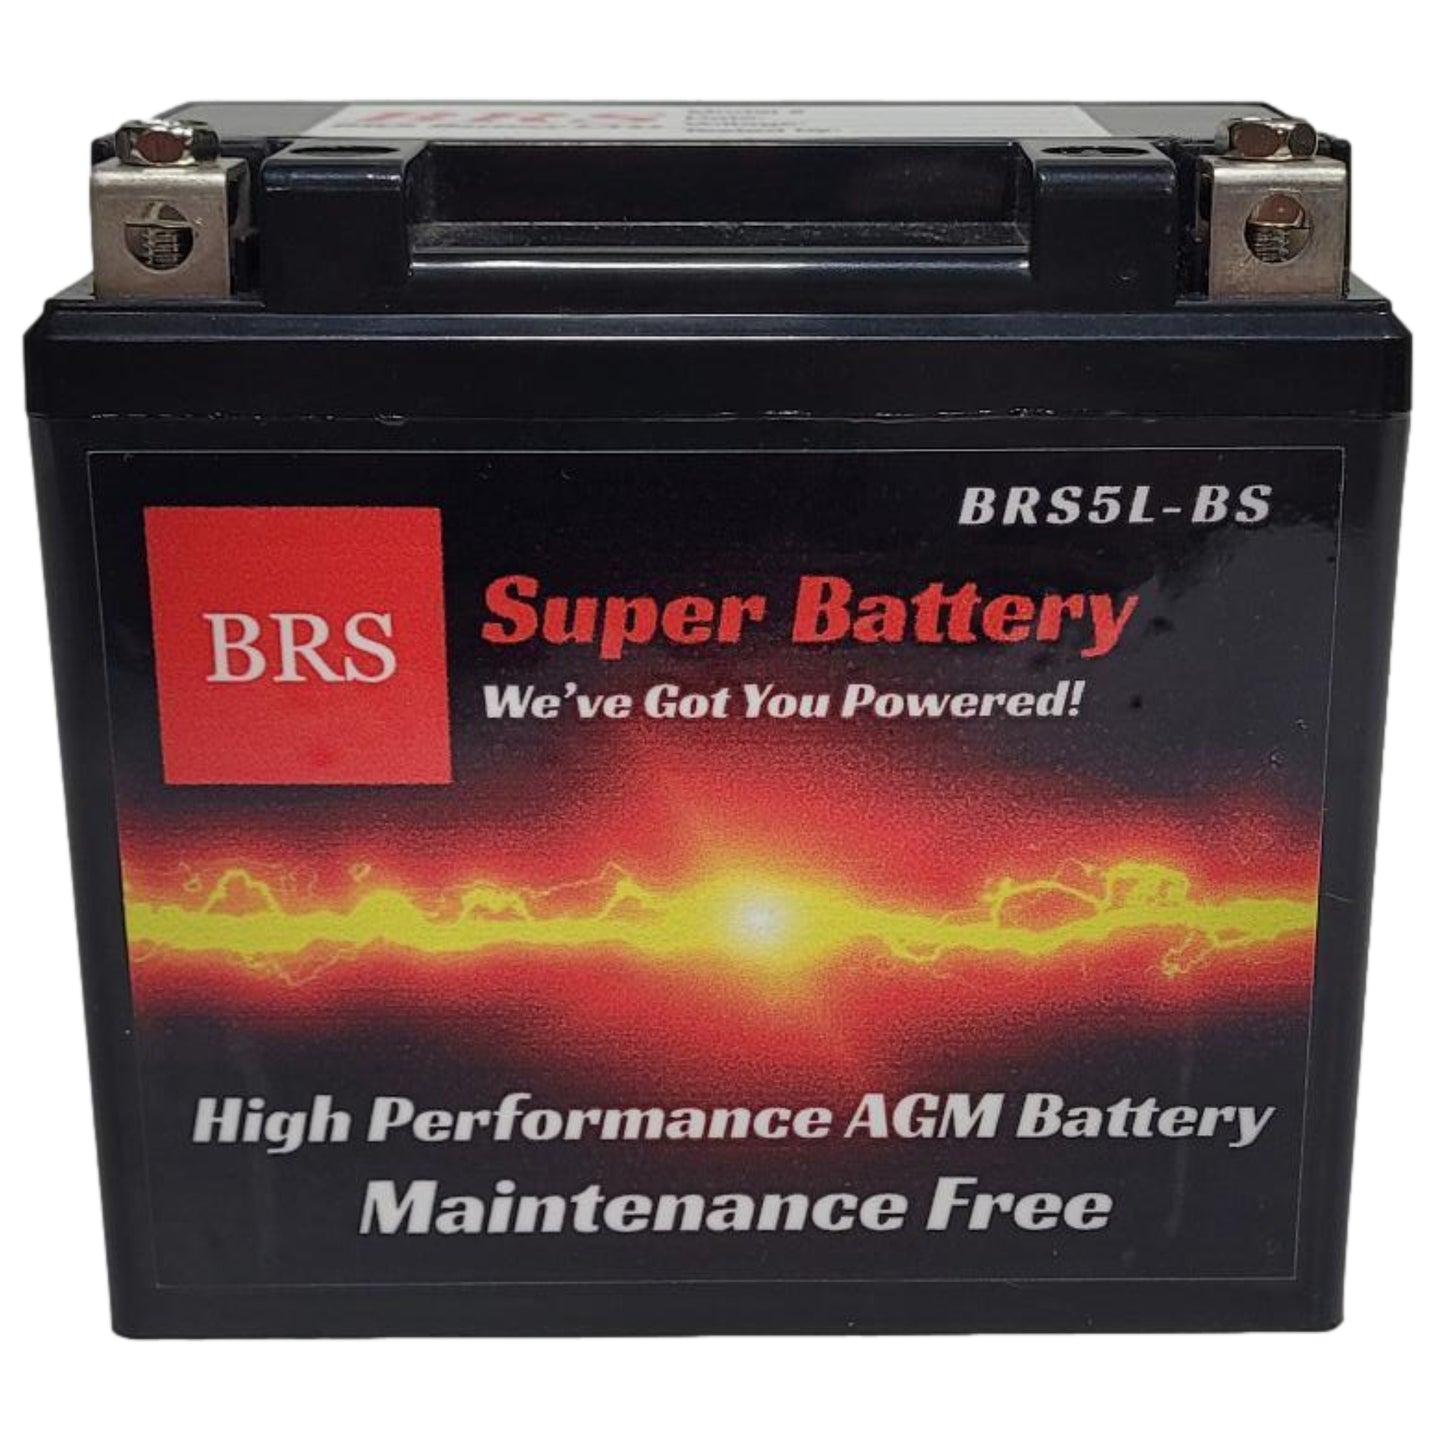 WPX5L-BS 12v High Performance Sealed AGM PowerSport 2 Year Battery - BRS Super Battery